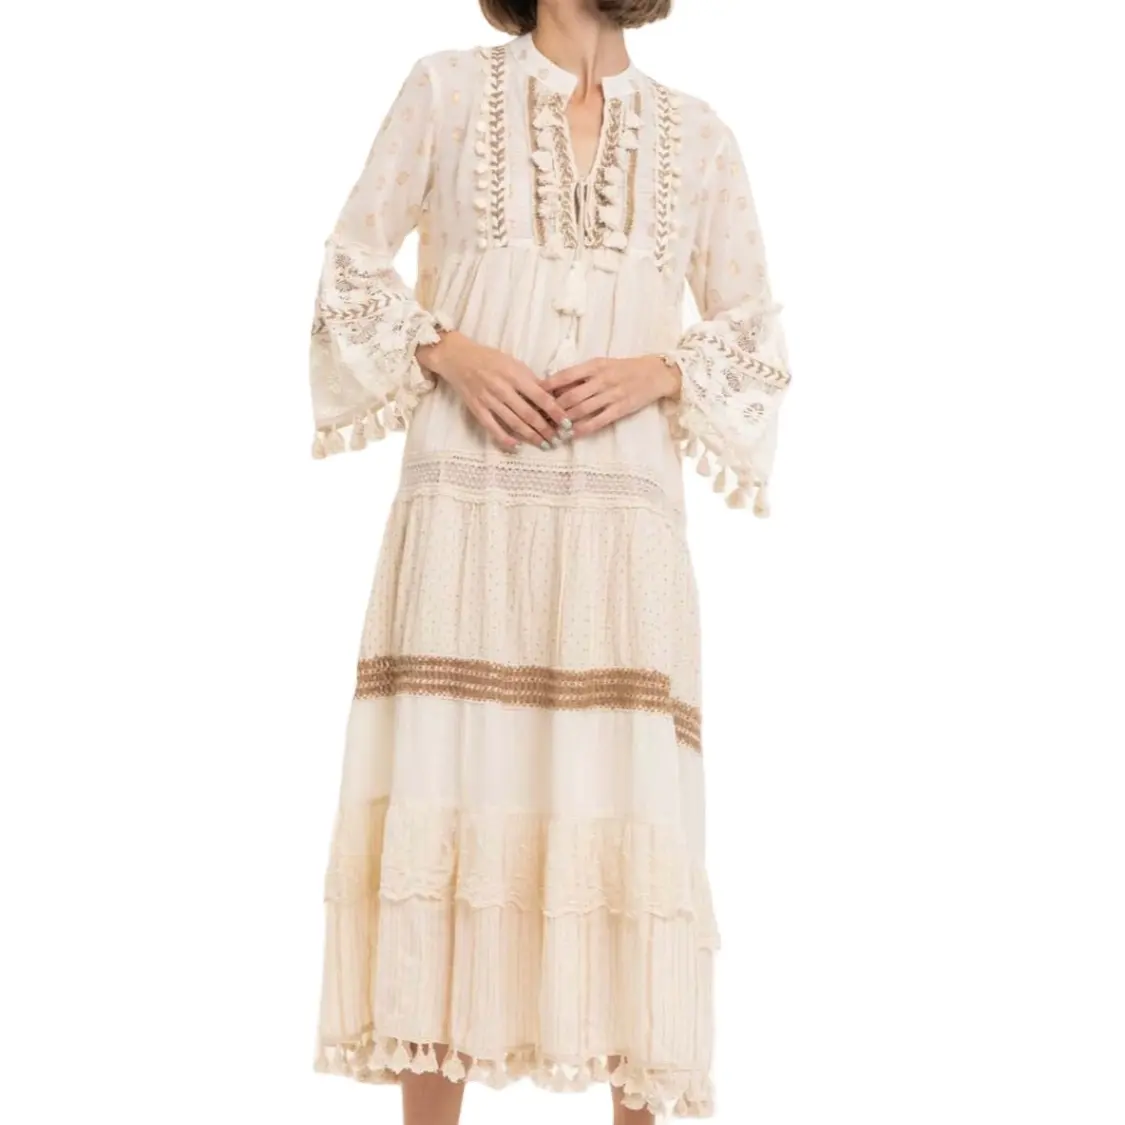 Bohemian branded dress maxi fashion casual women embroidered long dresses ladies women clothing